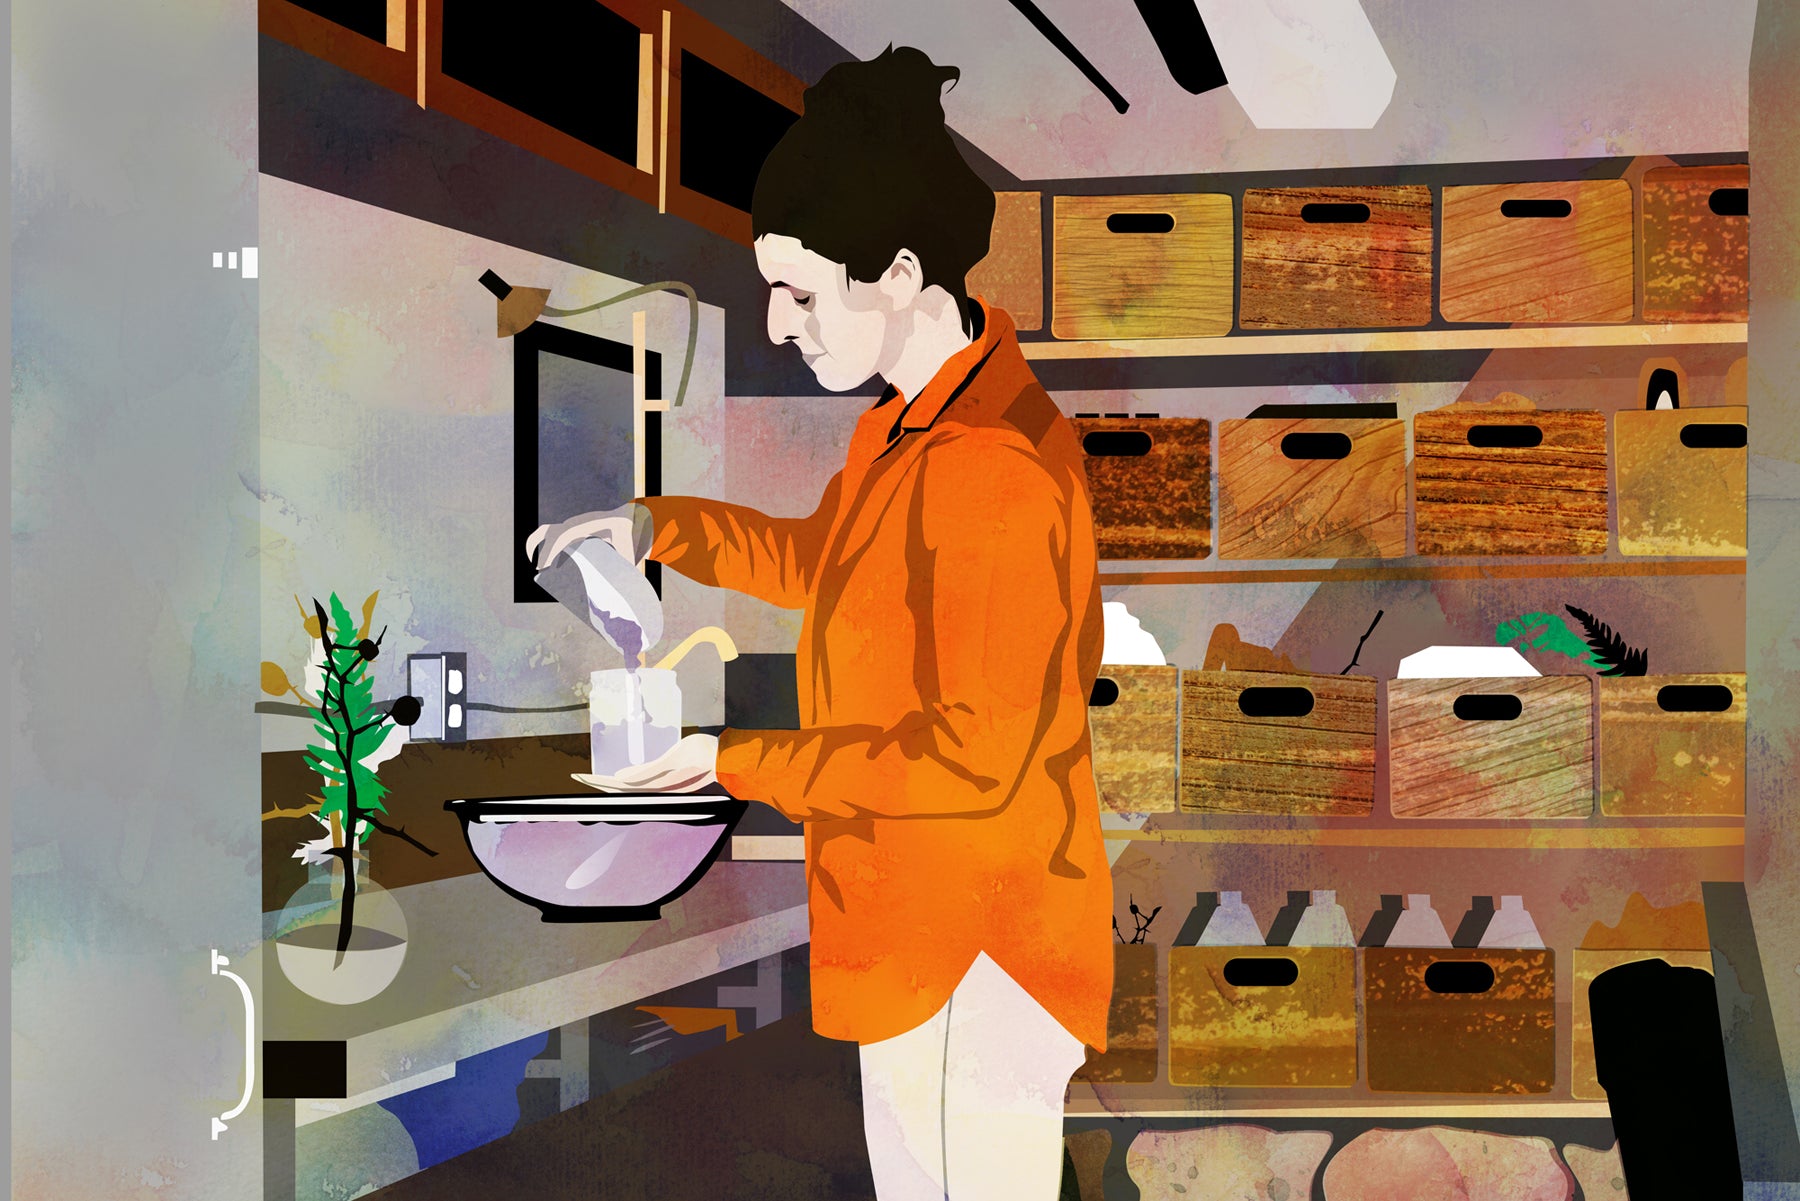 Illustration of Boreal Folk Apothecary founder Raphaëlle Gagnon making soap inside of her custom trailer lab, surrounded by wooden crates.